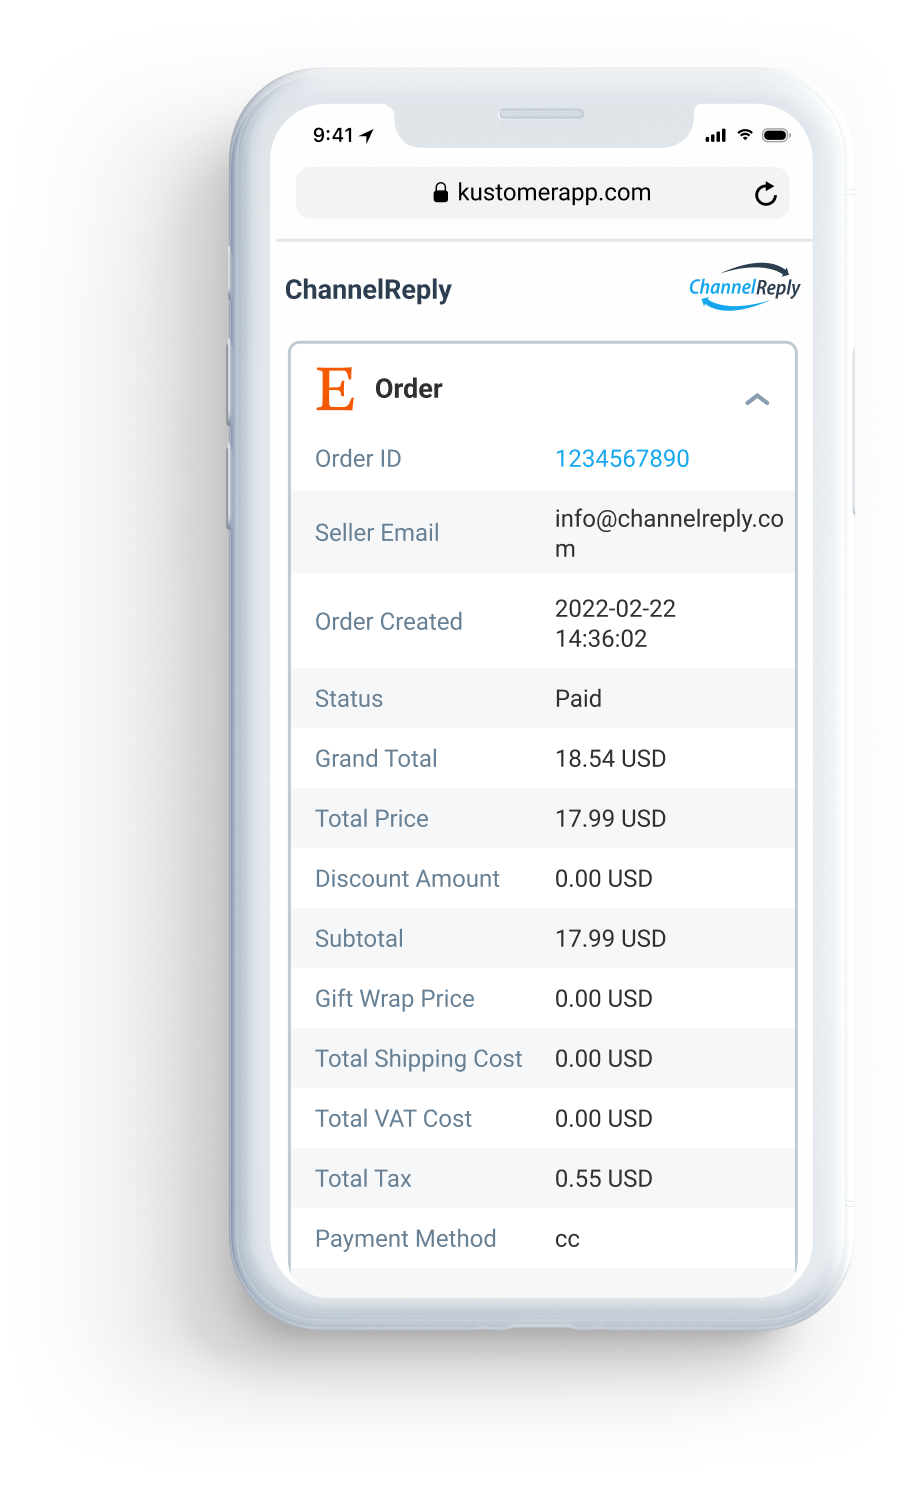 Illustration of Etsy support on an iPhone with Kustomer and ChannelReply